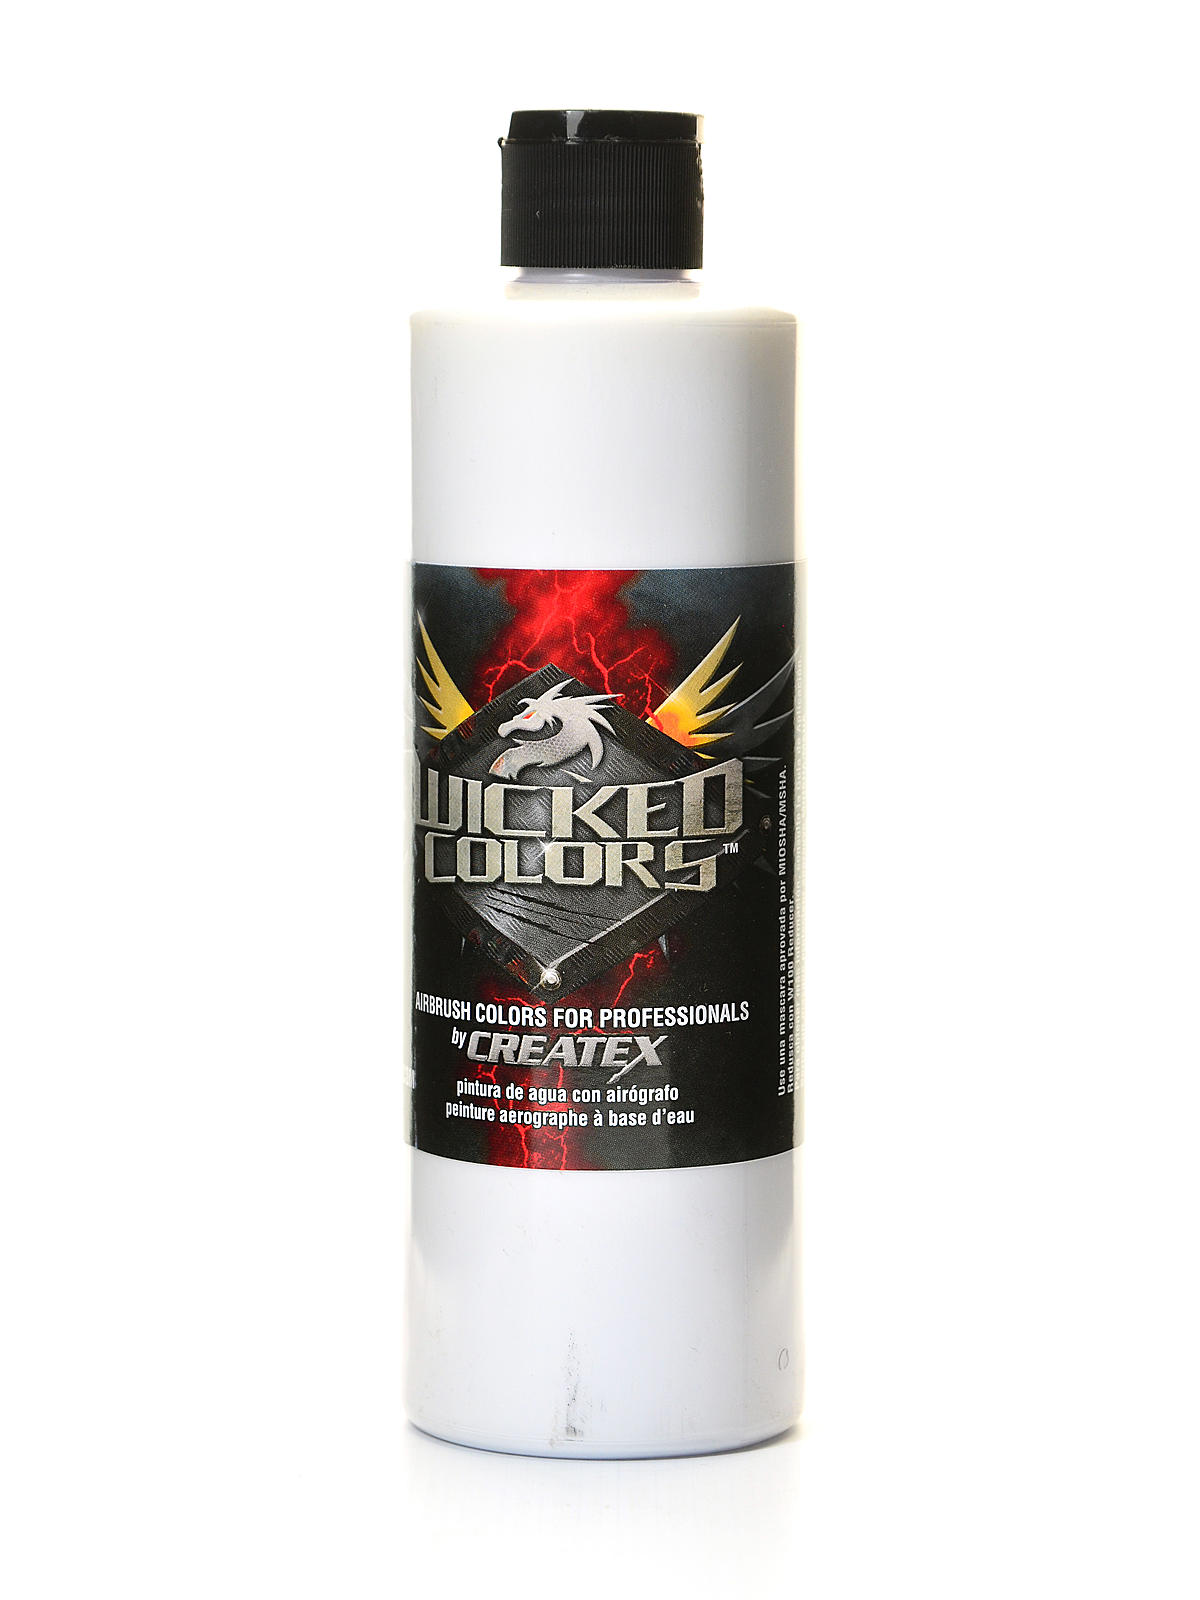 Wicked Colors Opaque White 16 Oz.